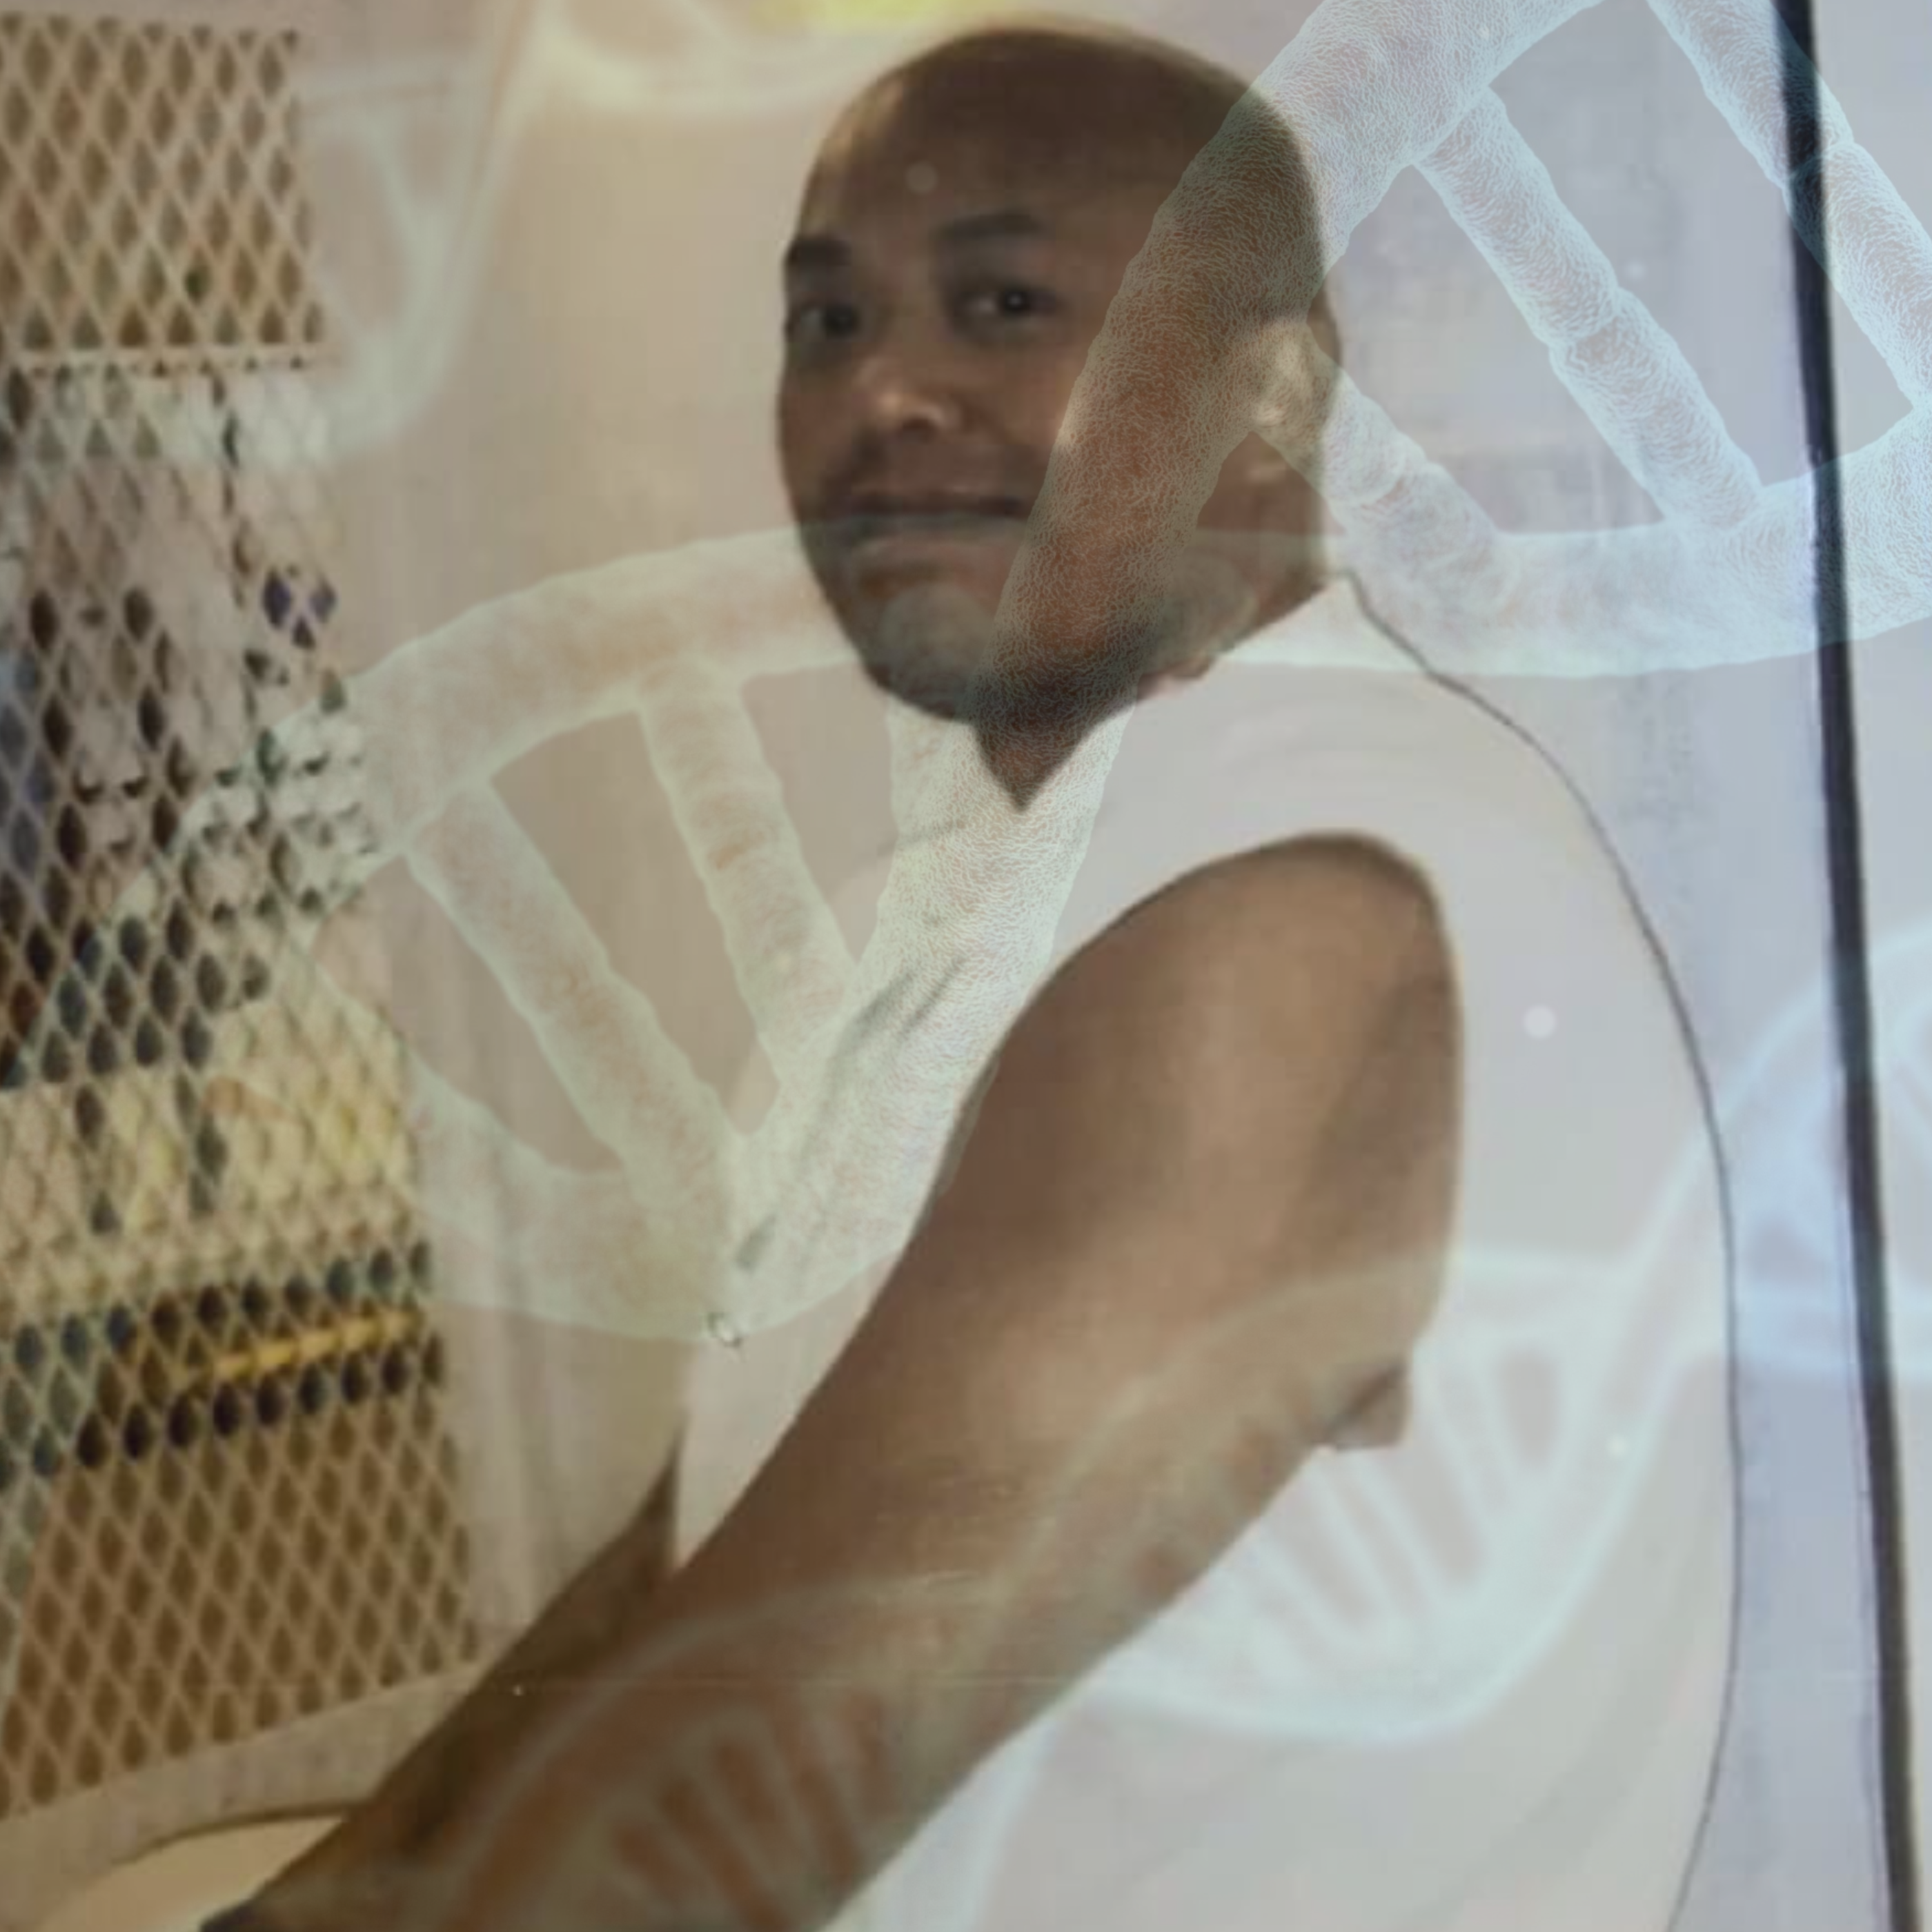 Kosoul Chanthakoummane, a bald Laotian man, sits inside a viewing window in a prison, wearing a sleeveless white top and white pants. His image has been superimposed, partly transparent, atop an illustration of DNA molecules in their double-helix shape.